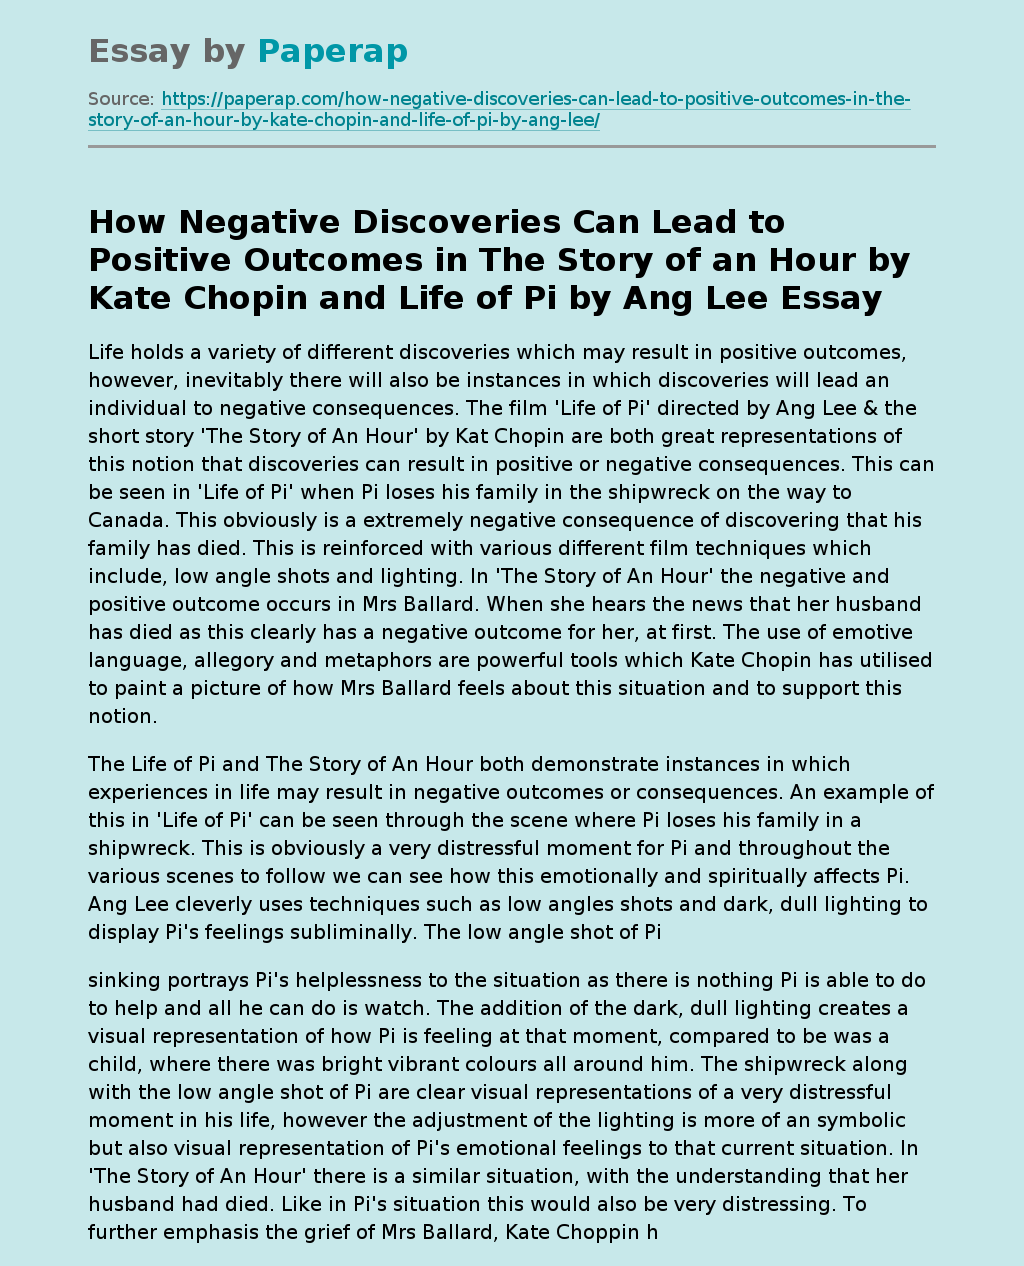 How Negative Discoveries Can Lead to Positive Outcomes in The Story of an Hour by Kate Chopin and Life of Pi by Ang Lee